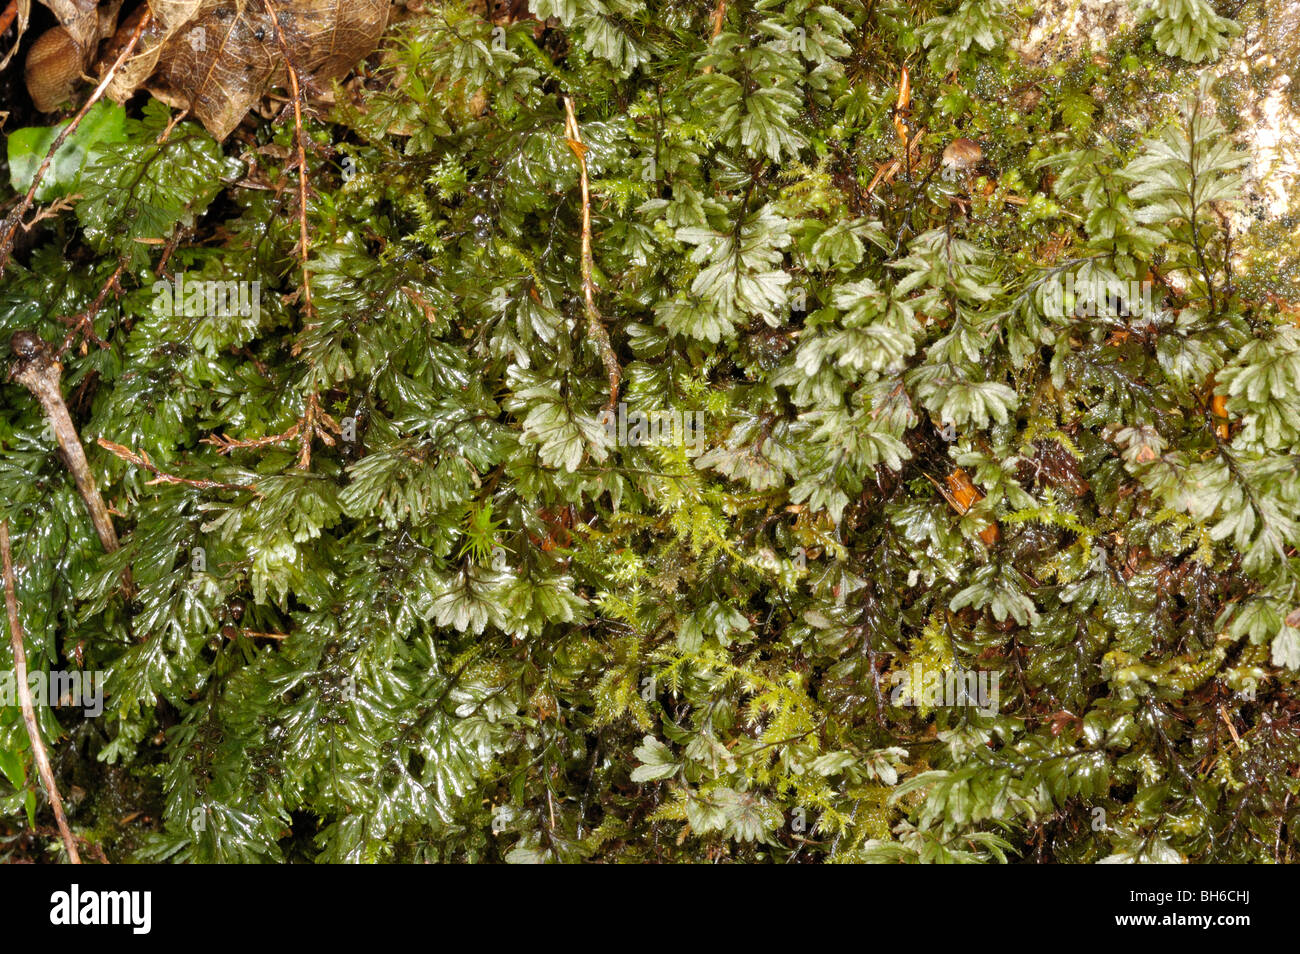 Filmy-ferns together Stock Photo